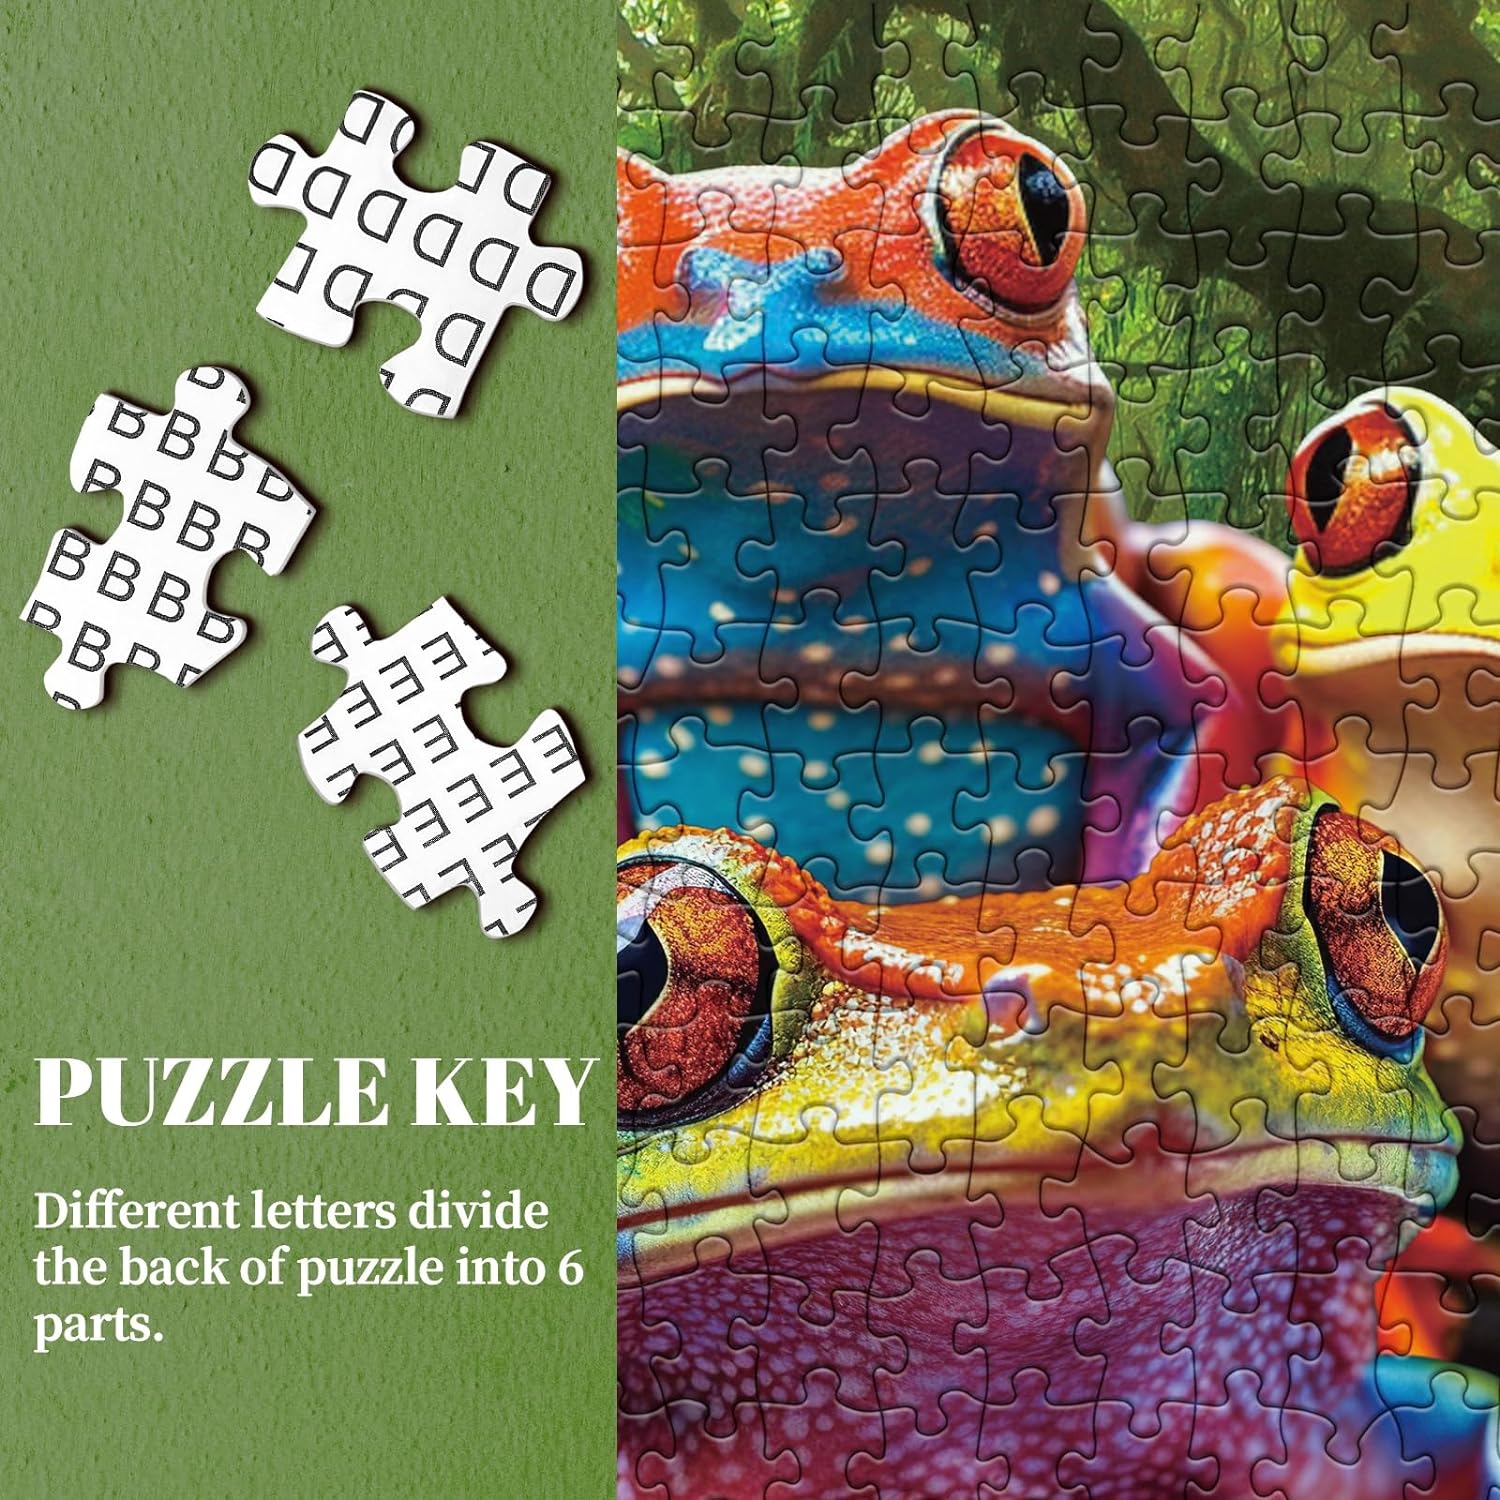 Colorful Frog Jigsaw Puzzle 1000 Pieces